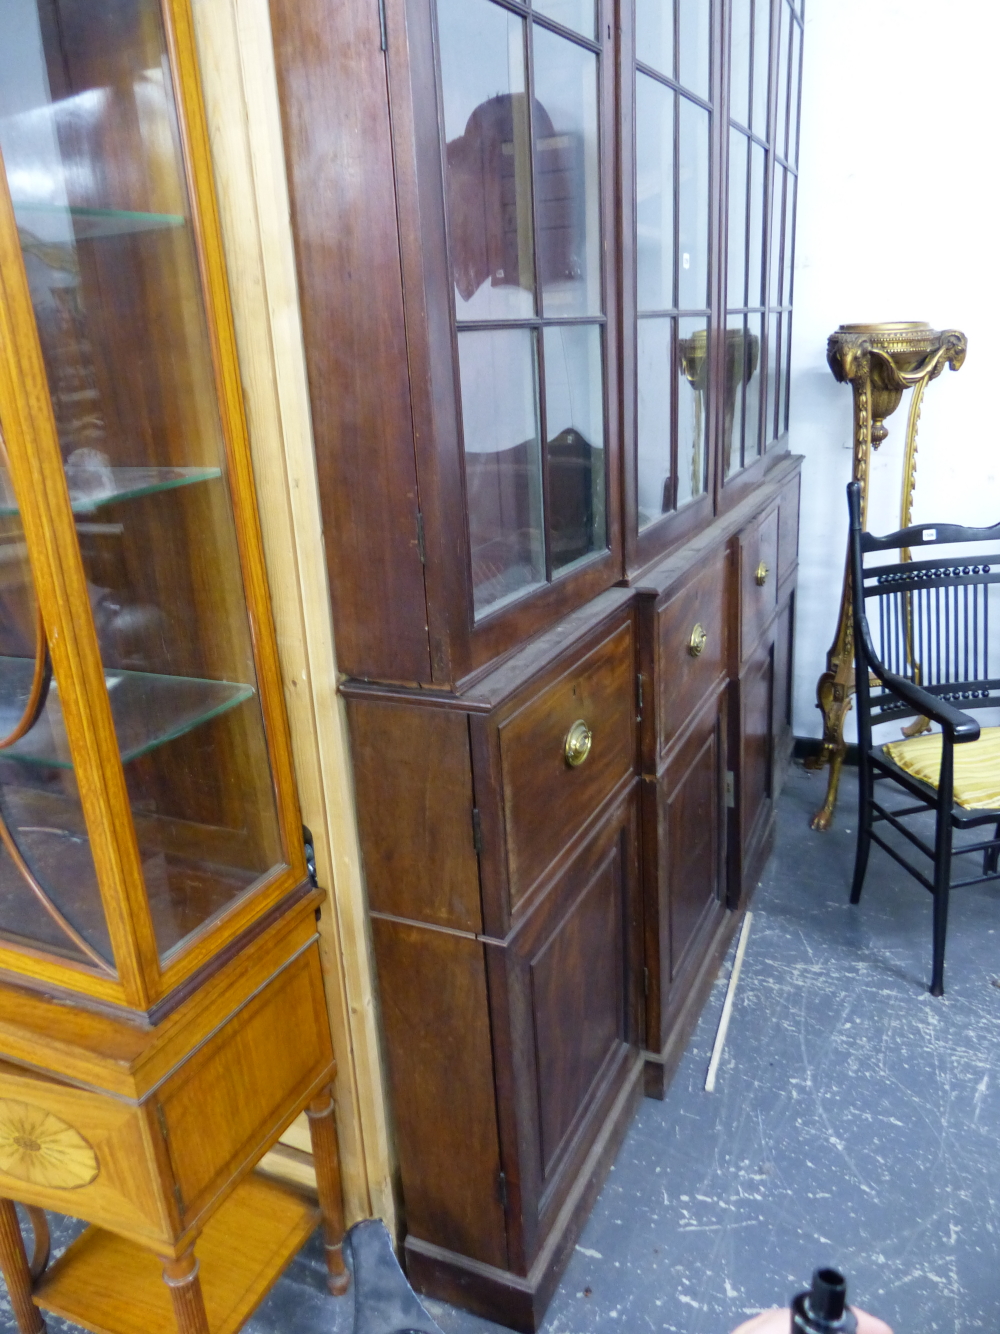 A GEO.III. MAHOGANY SHALLOW BOOKCASE OR APOTHECARY DISPLAY CABINET WITH FOUR GLAZED DOORS OVER PANEL - Image 5 of 6